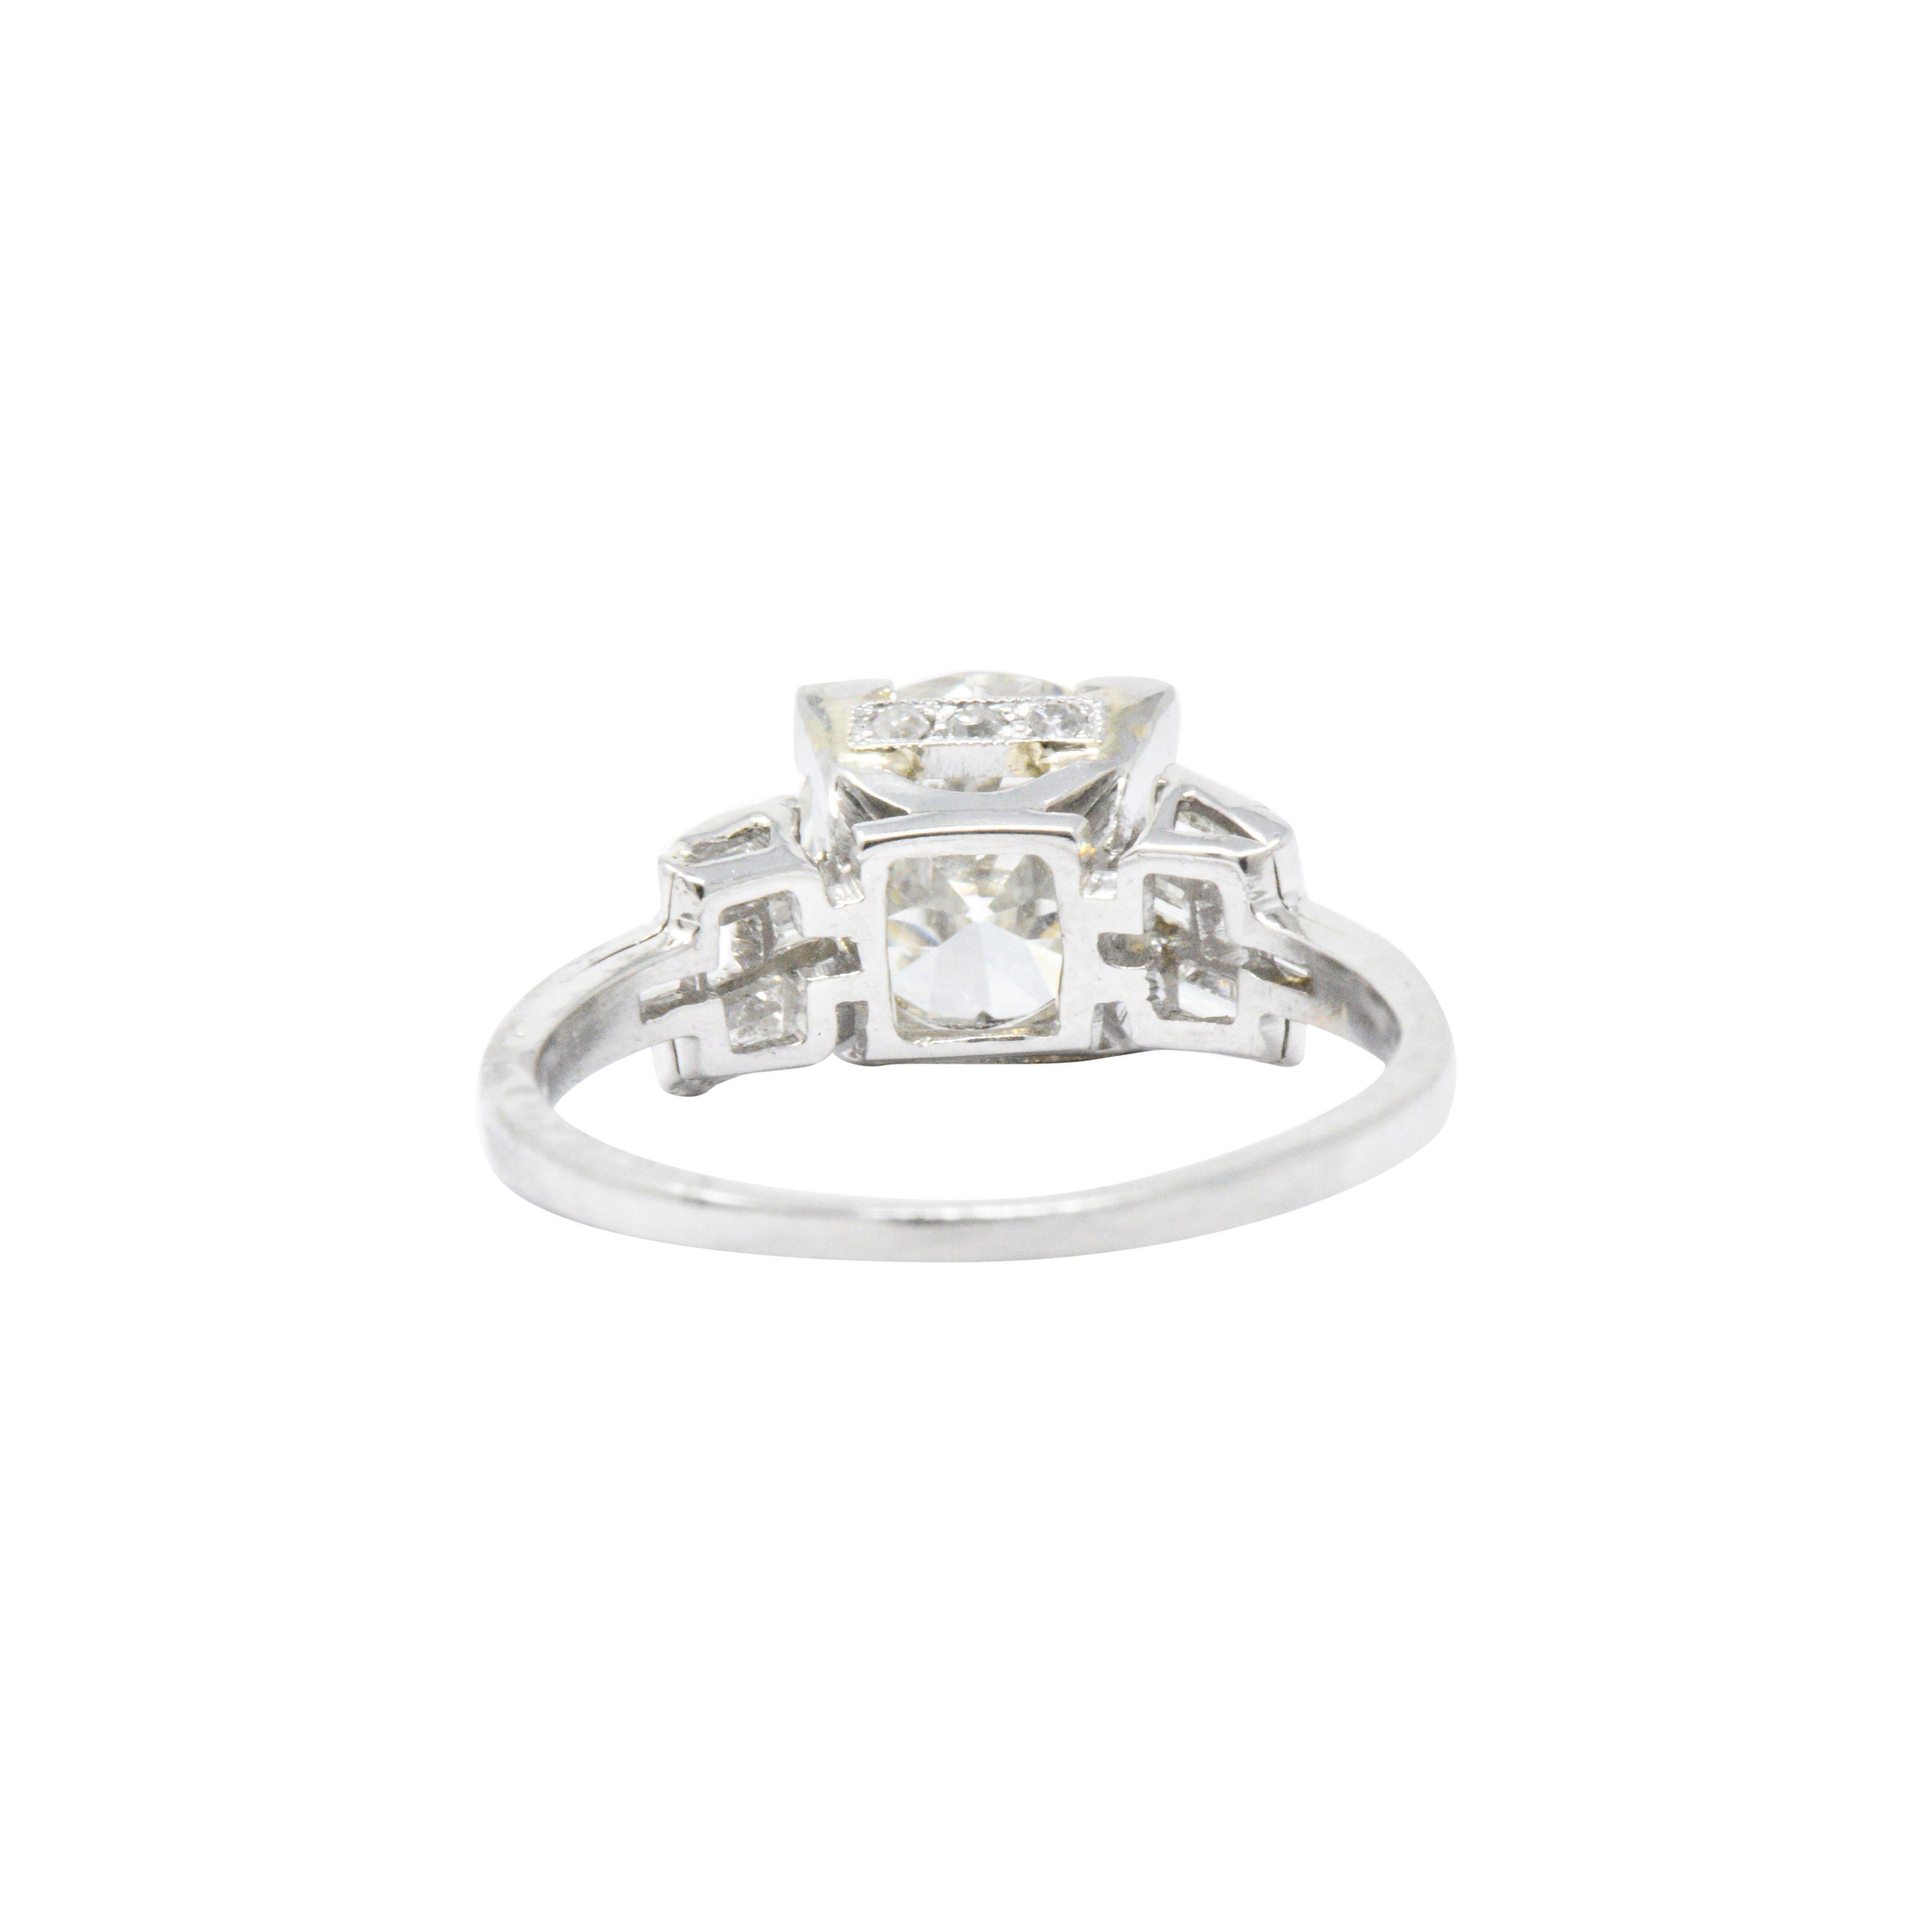 Centering, in a square form head, a transitional cut diamond weighing 1.84 carats, K in color and VVS2 clarity

Flanked by baguette cut diamonds and accented by round brilliant cut diamonds weighing approximately 0.70 total carat, eye-clean and